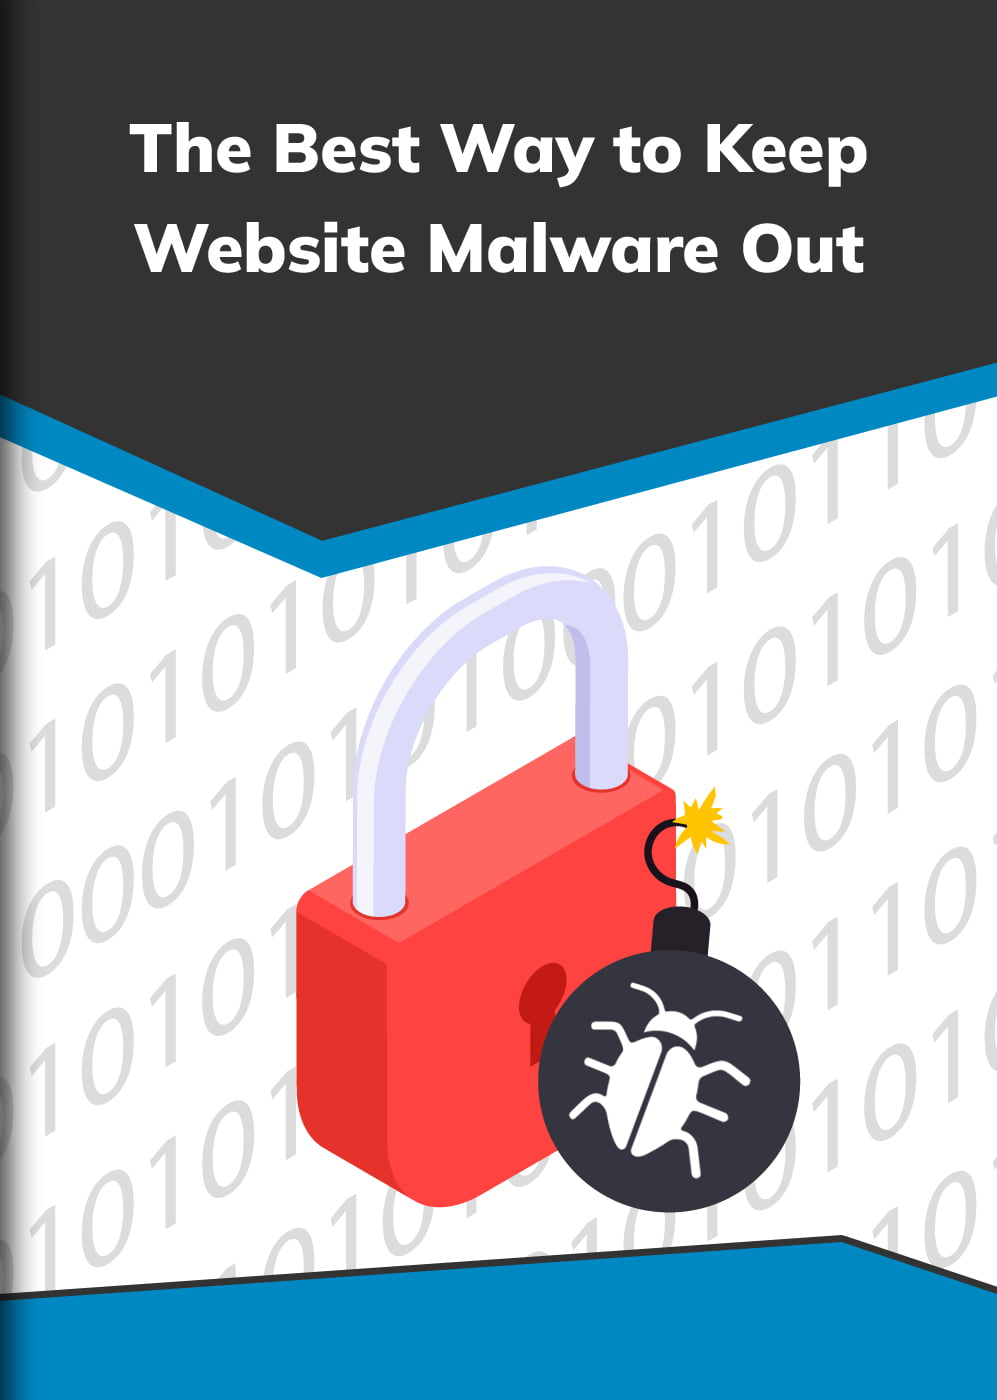 The-Best-Way-to-Keep-Website-Malware-Out-01